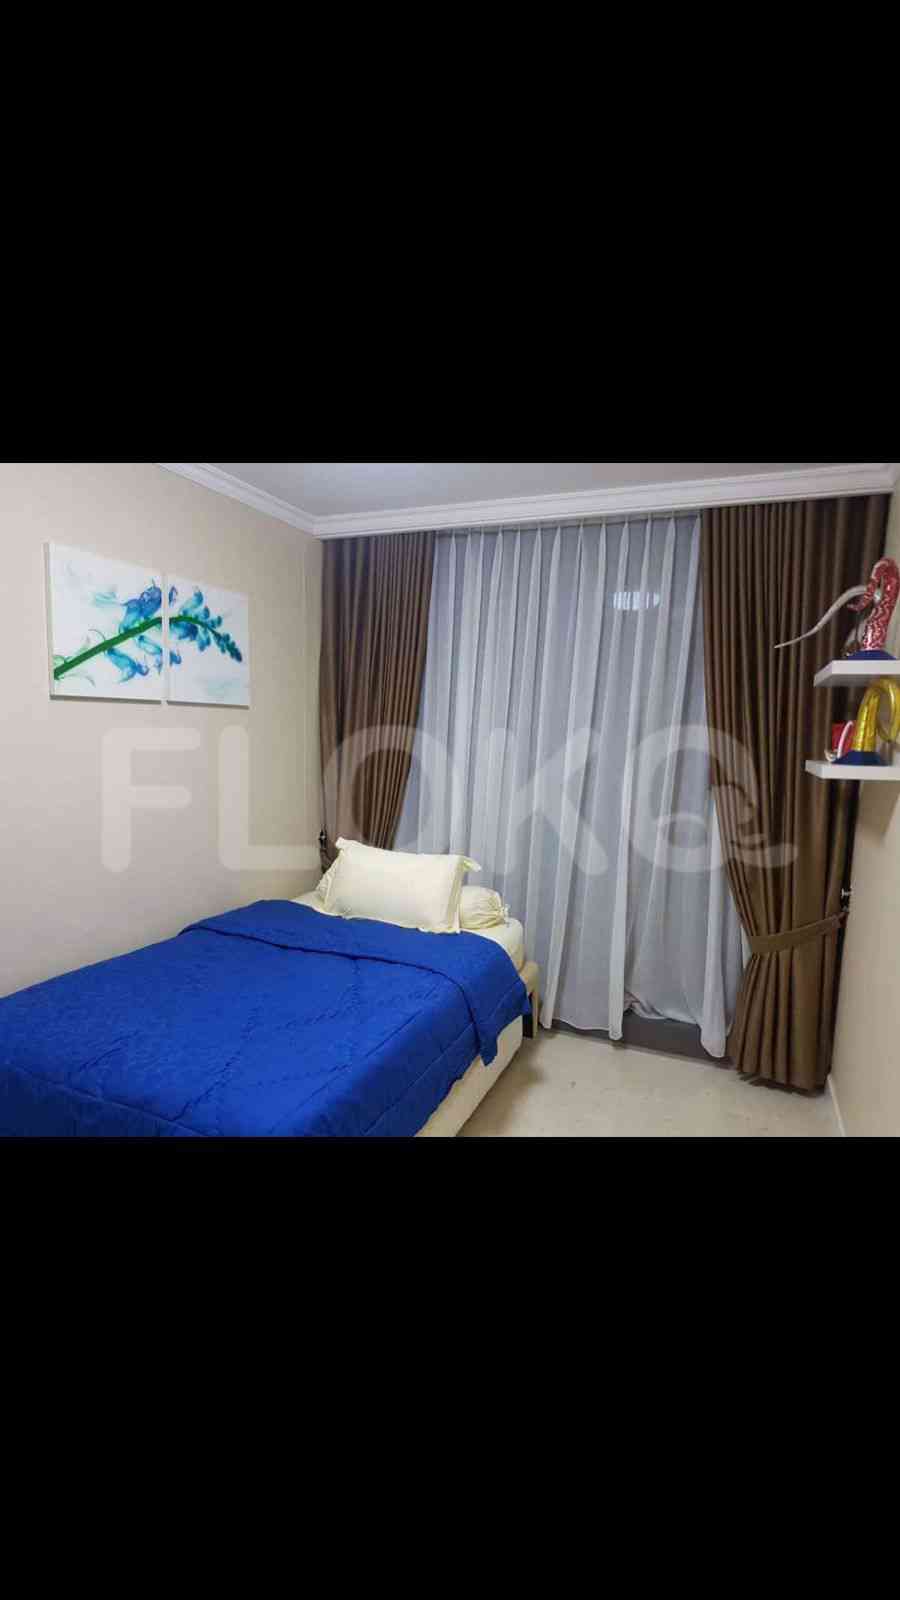 2 Bedroom on 26th Floor for Rent in Lavanue Apartment - fpafa4 1